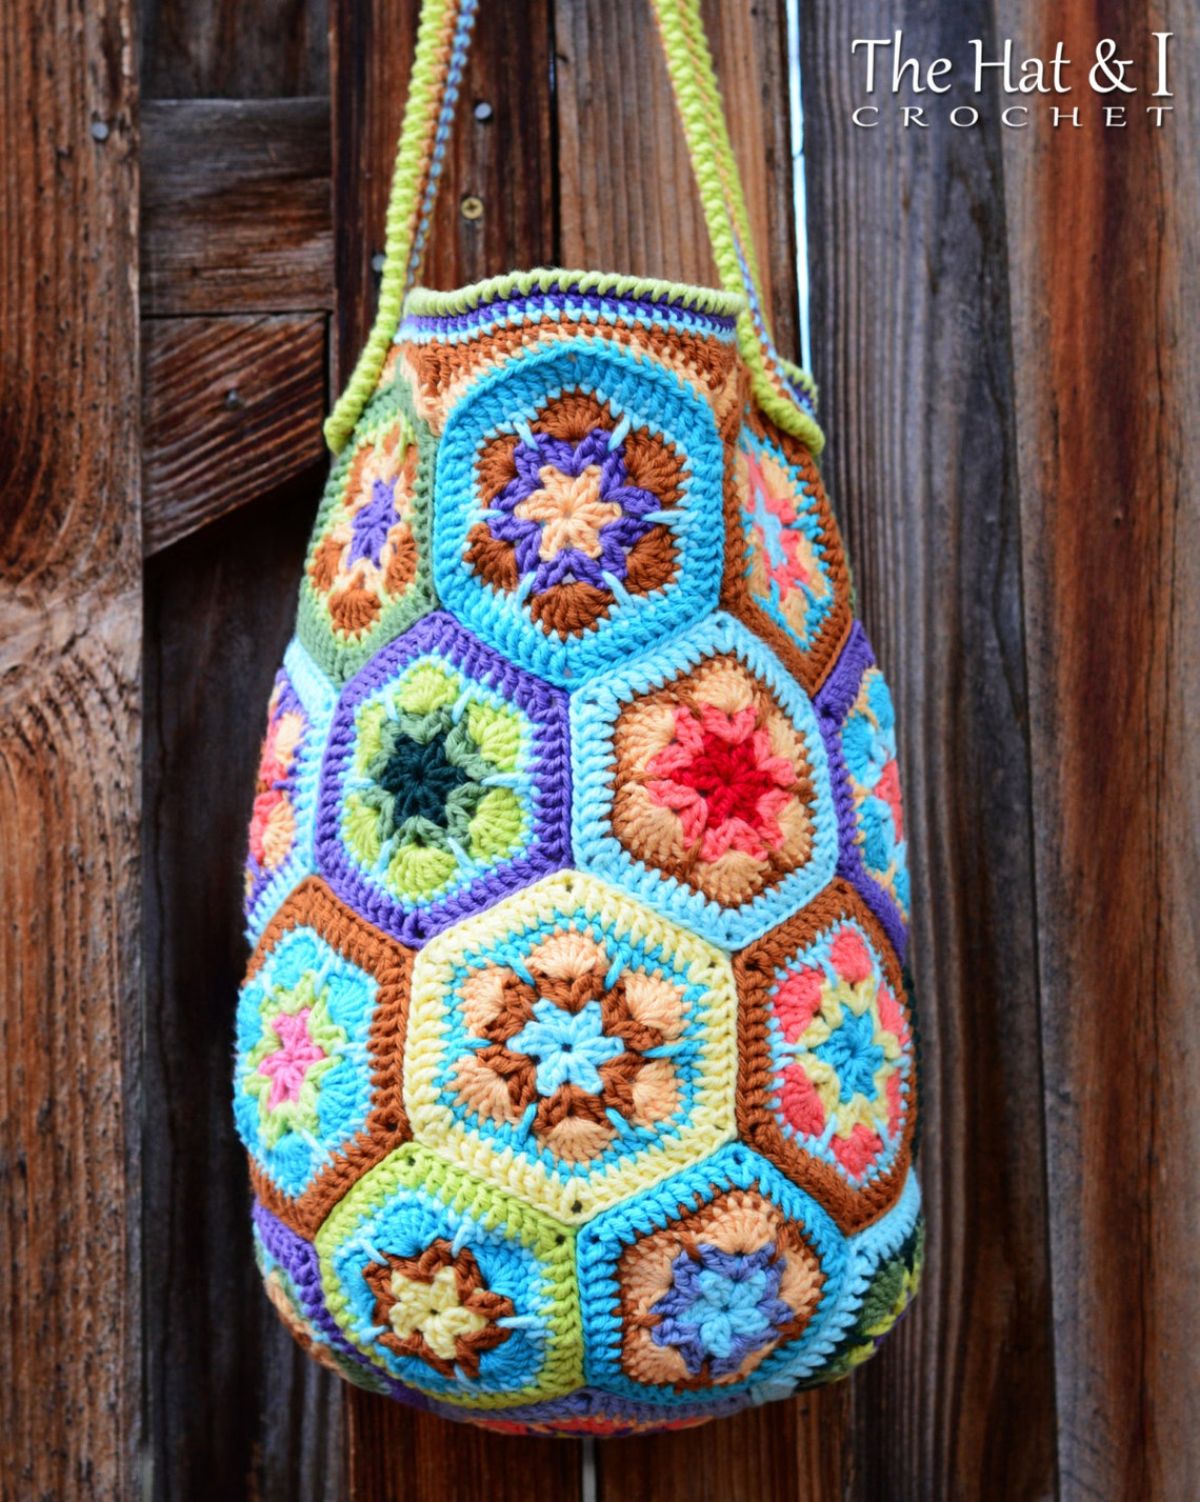 Brightly colored crochet bag with hexagons of African flowers stitched together in yellow, blue, purple, green and orange hanging from green straps.